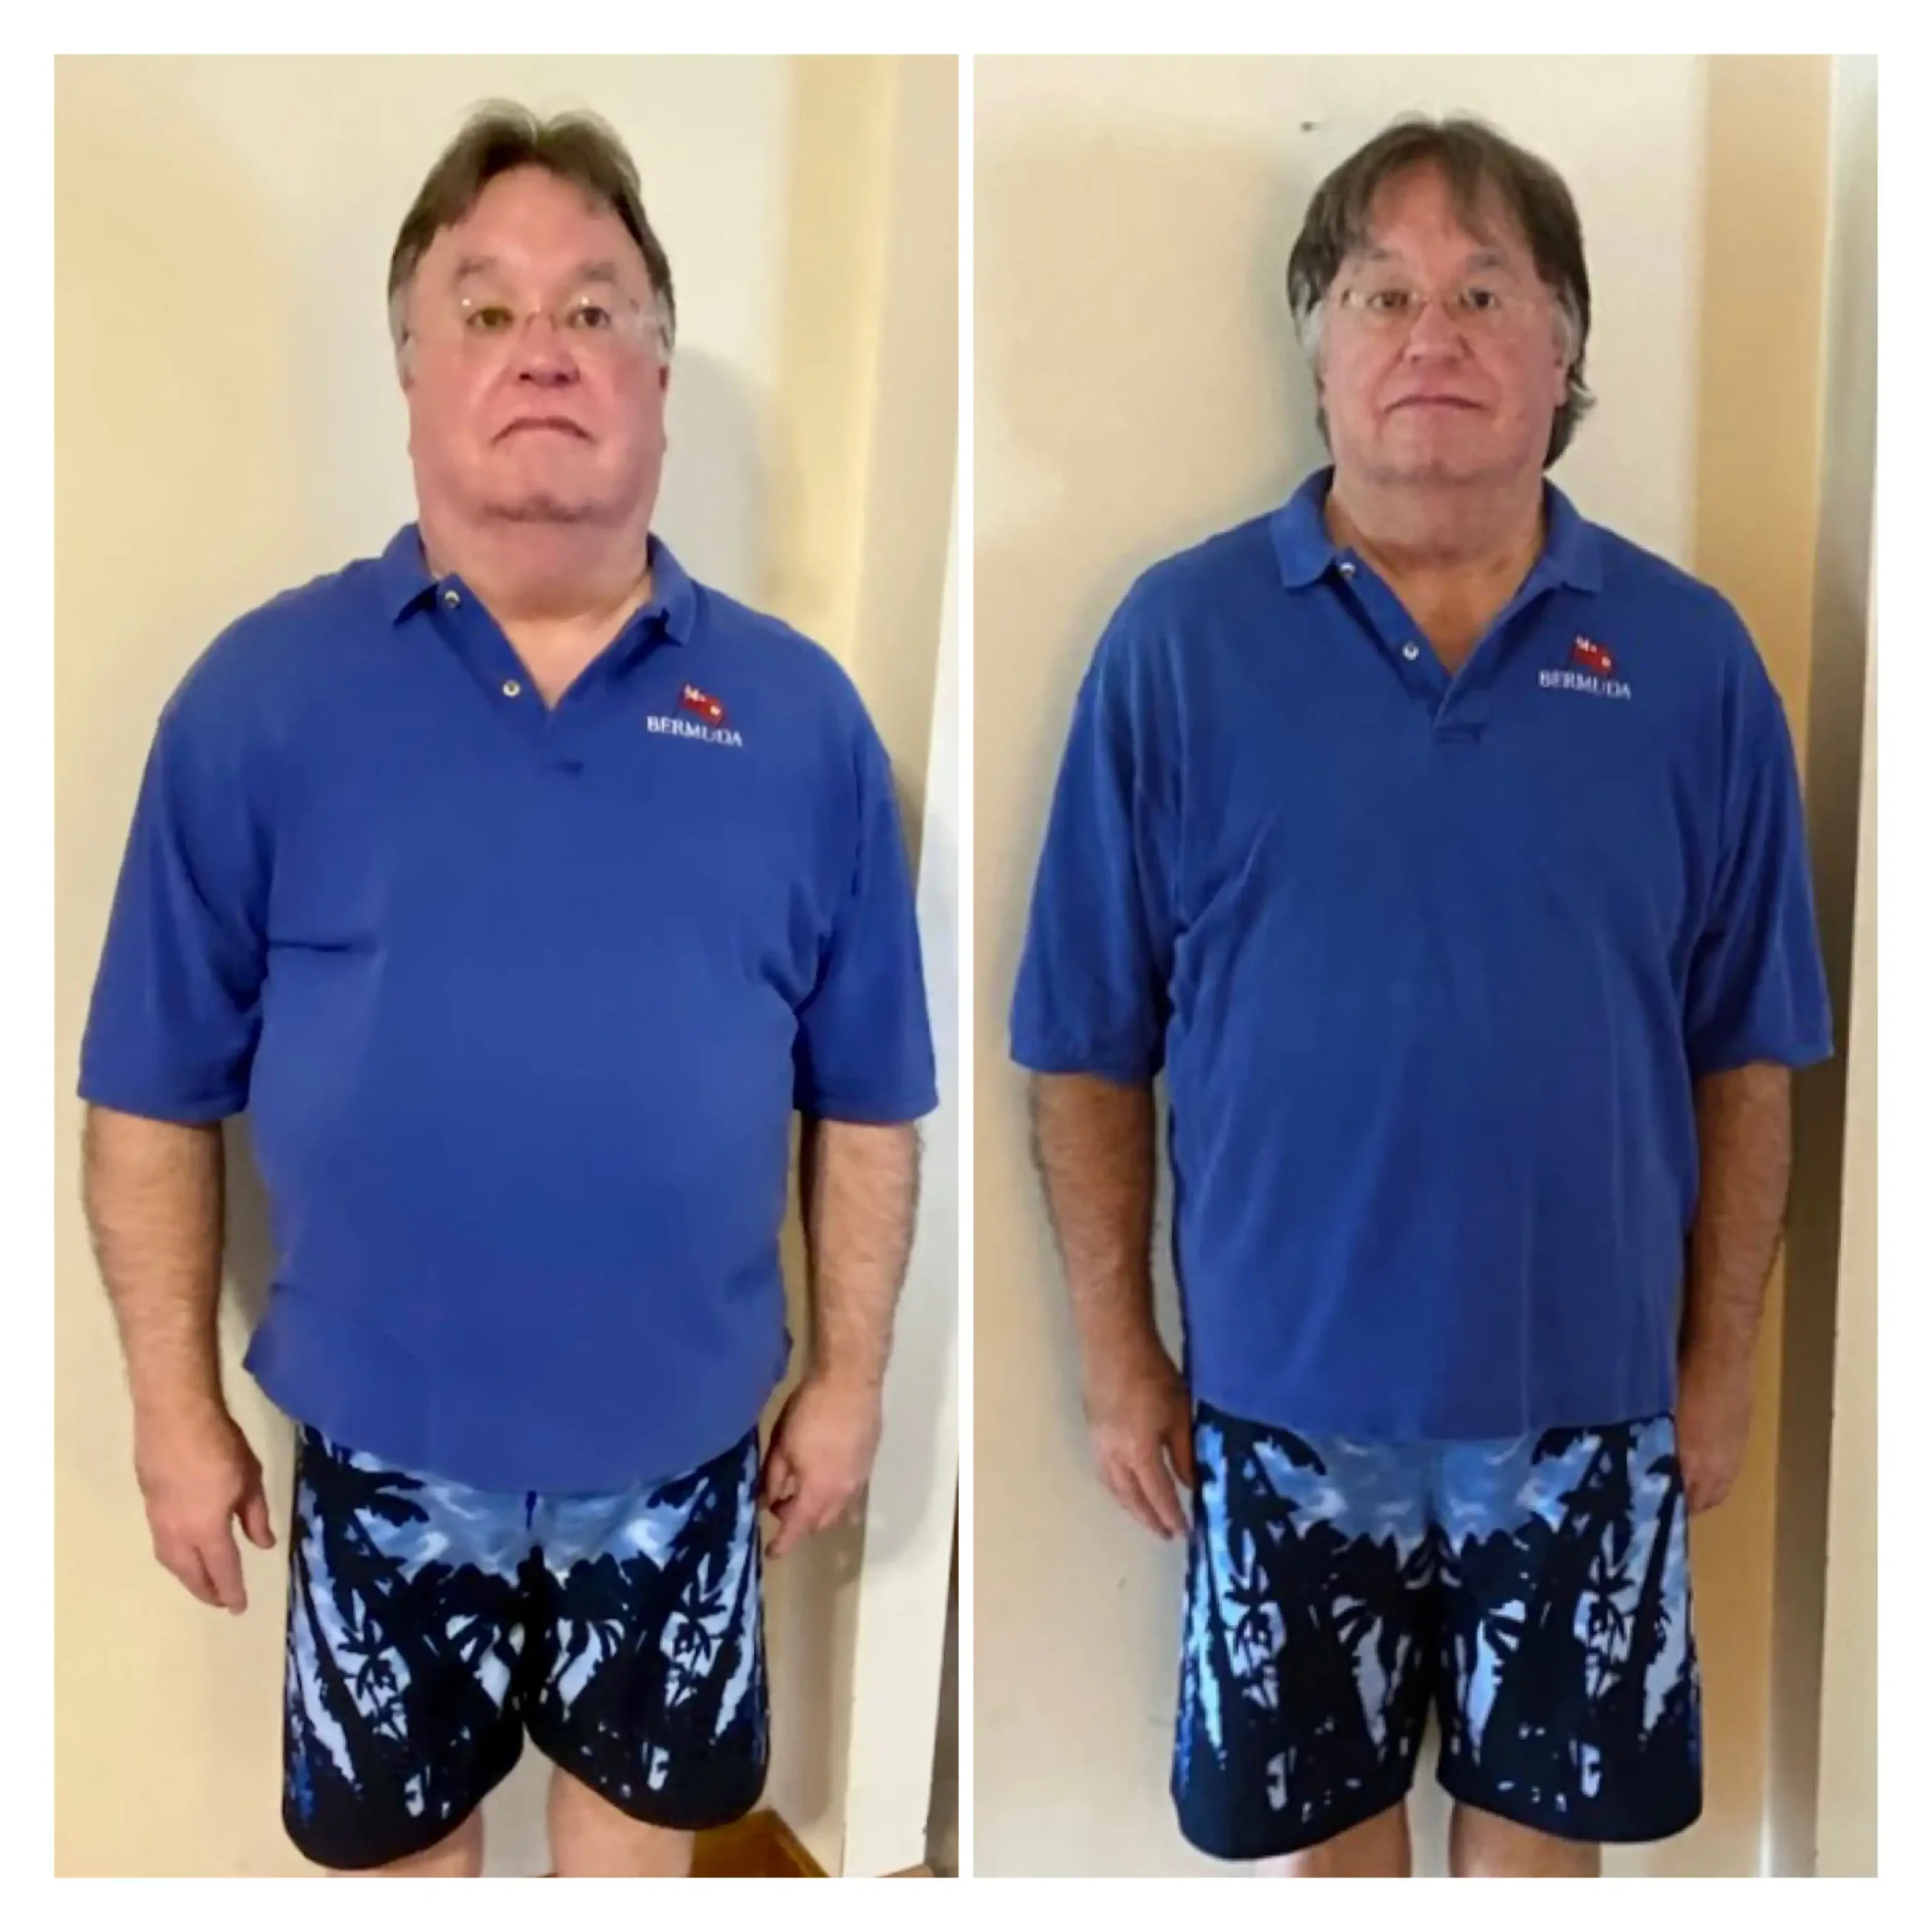 Dan S. before and after weight loss front view